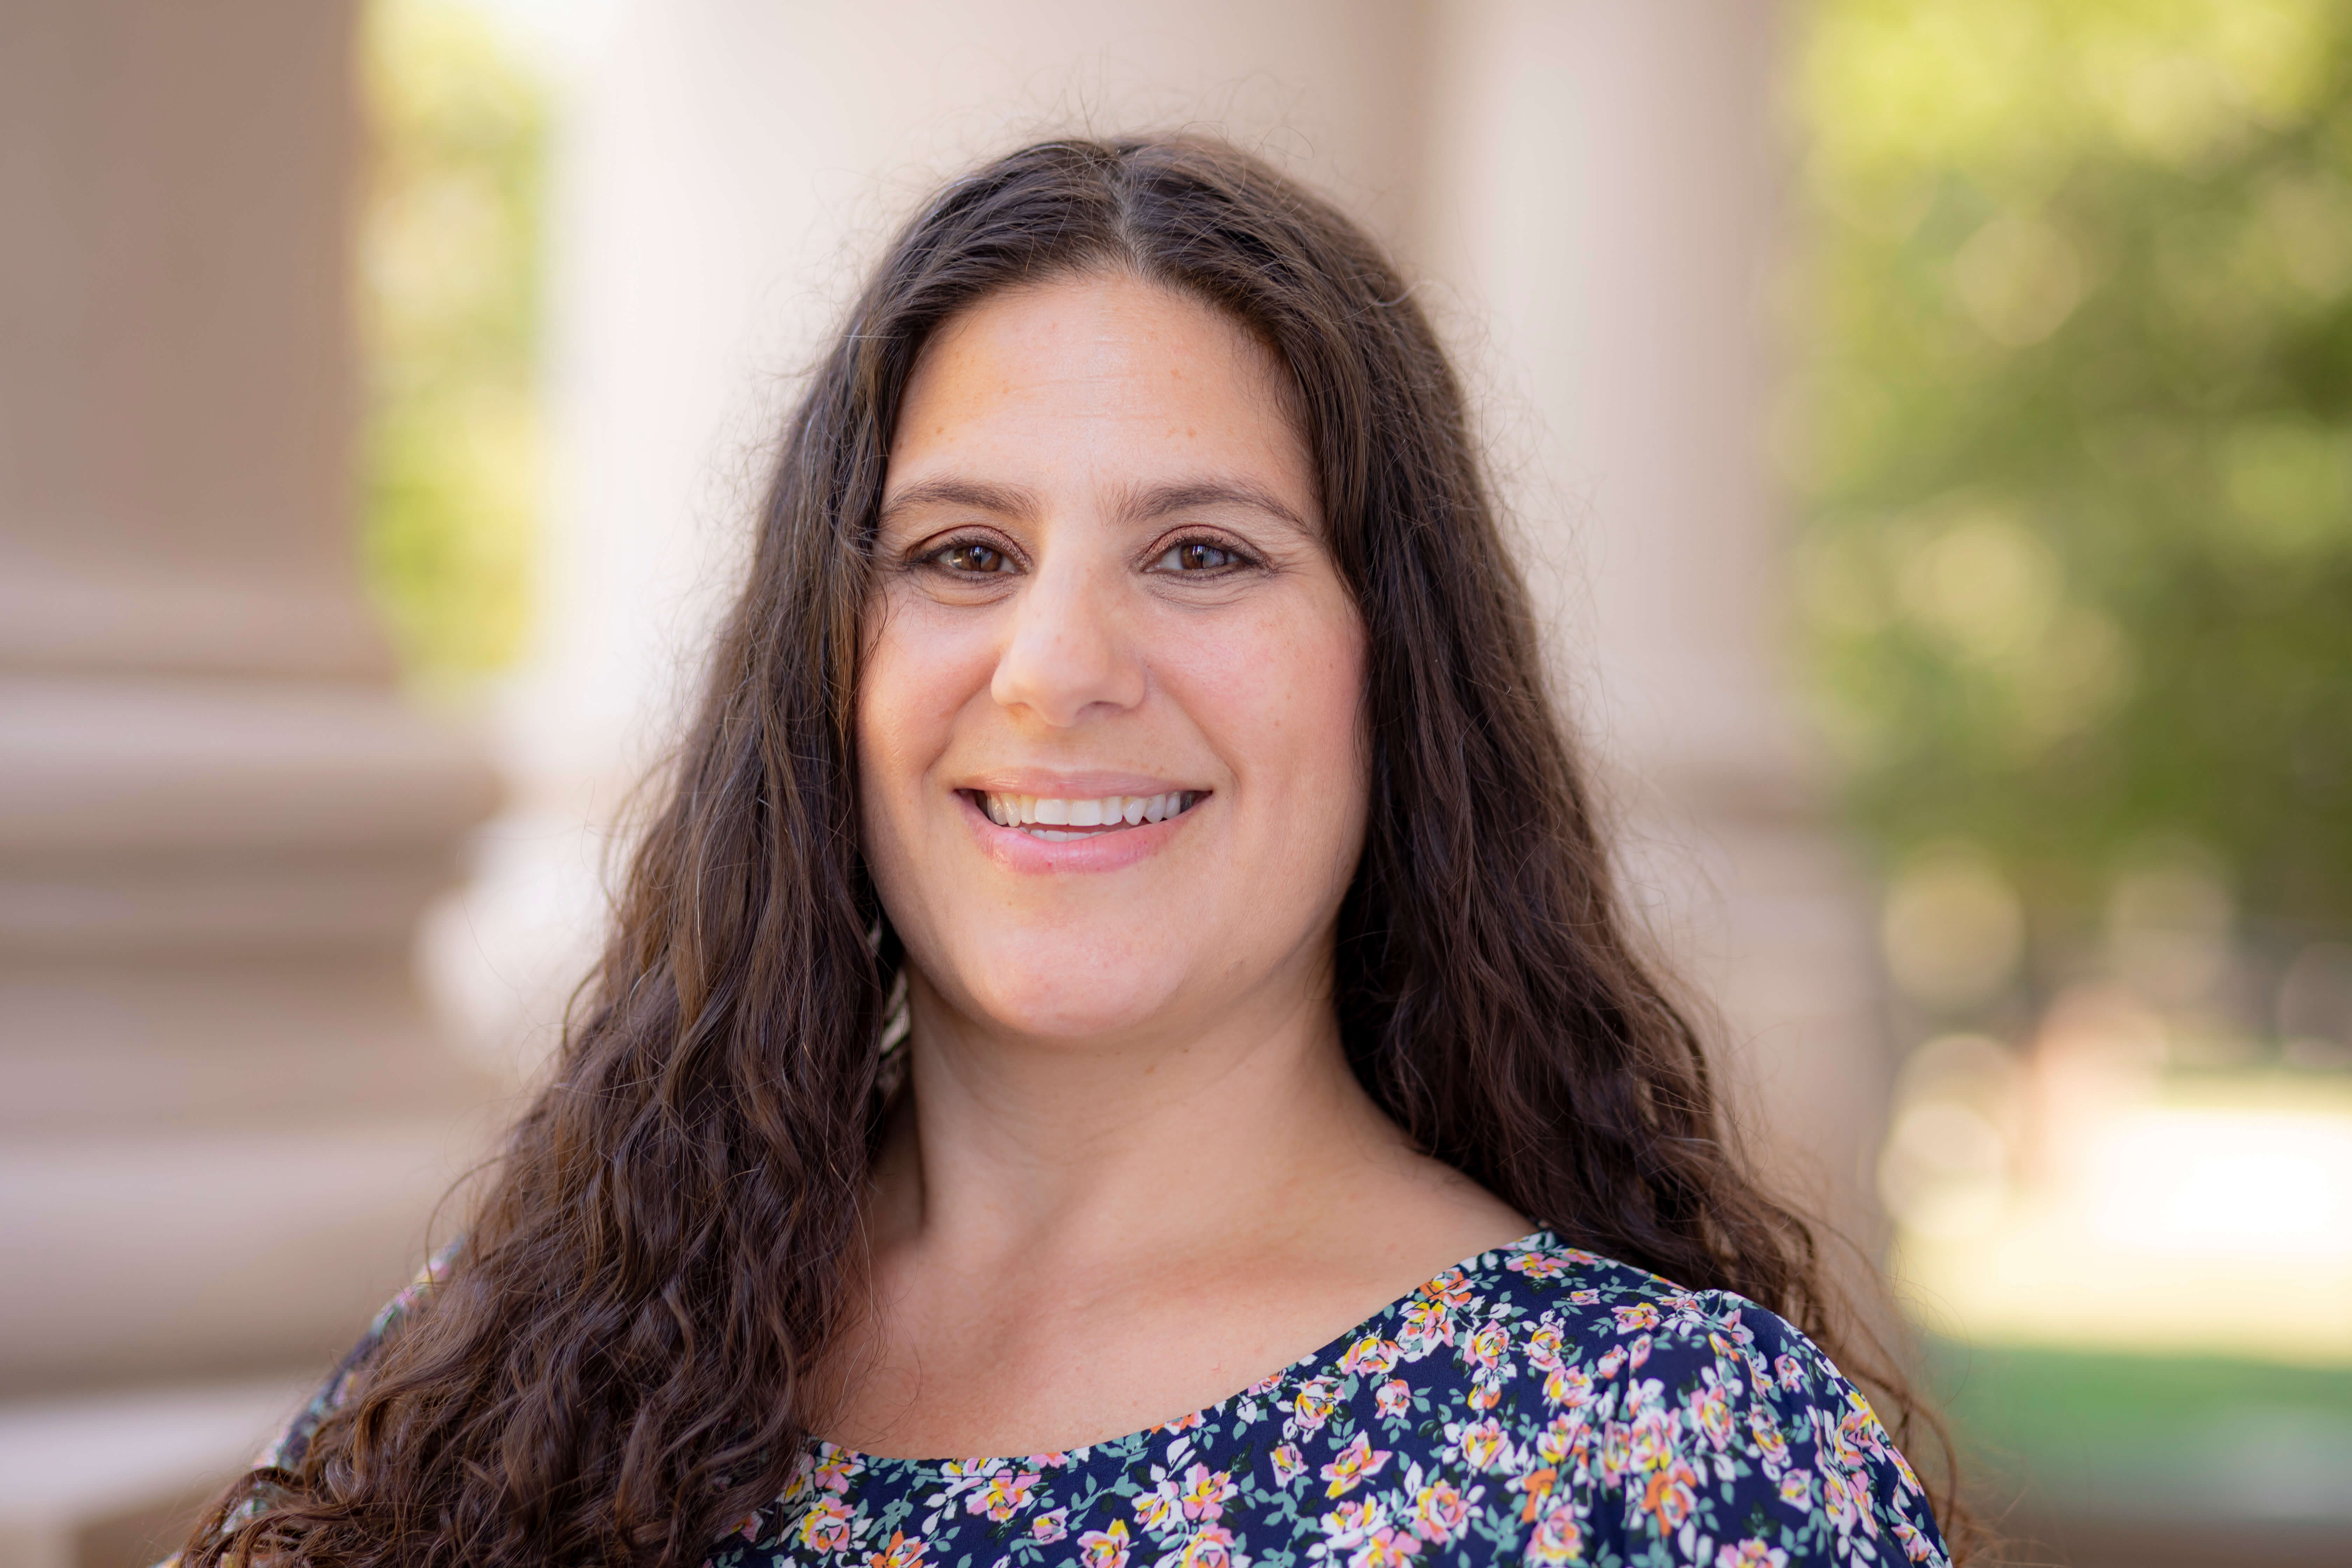 Professor Laura Giacobbe poses for headshot at Monmouth University